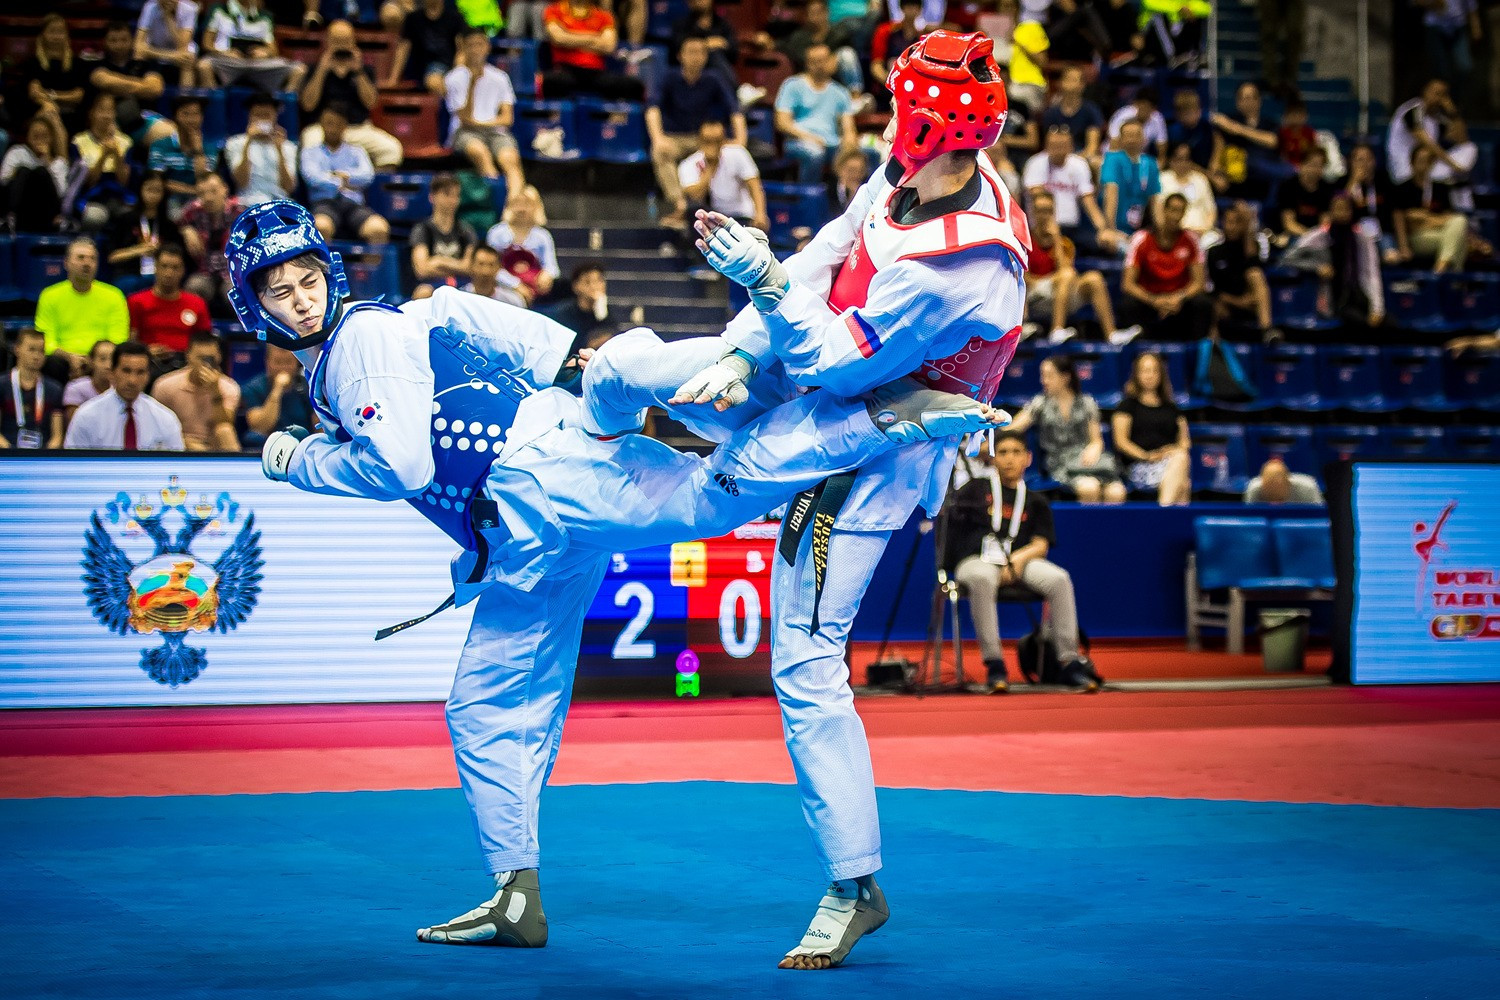 South Korea's Lee Dae-hoon beat Russia's Alexey Denisenko in the final of the under 68kg 
event in Moscow ©World Taekwondo